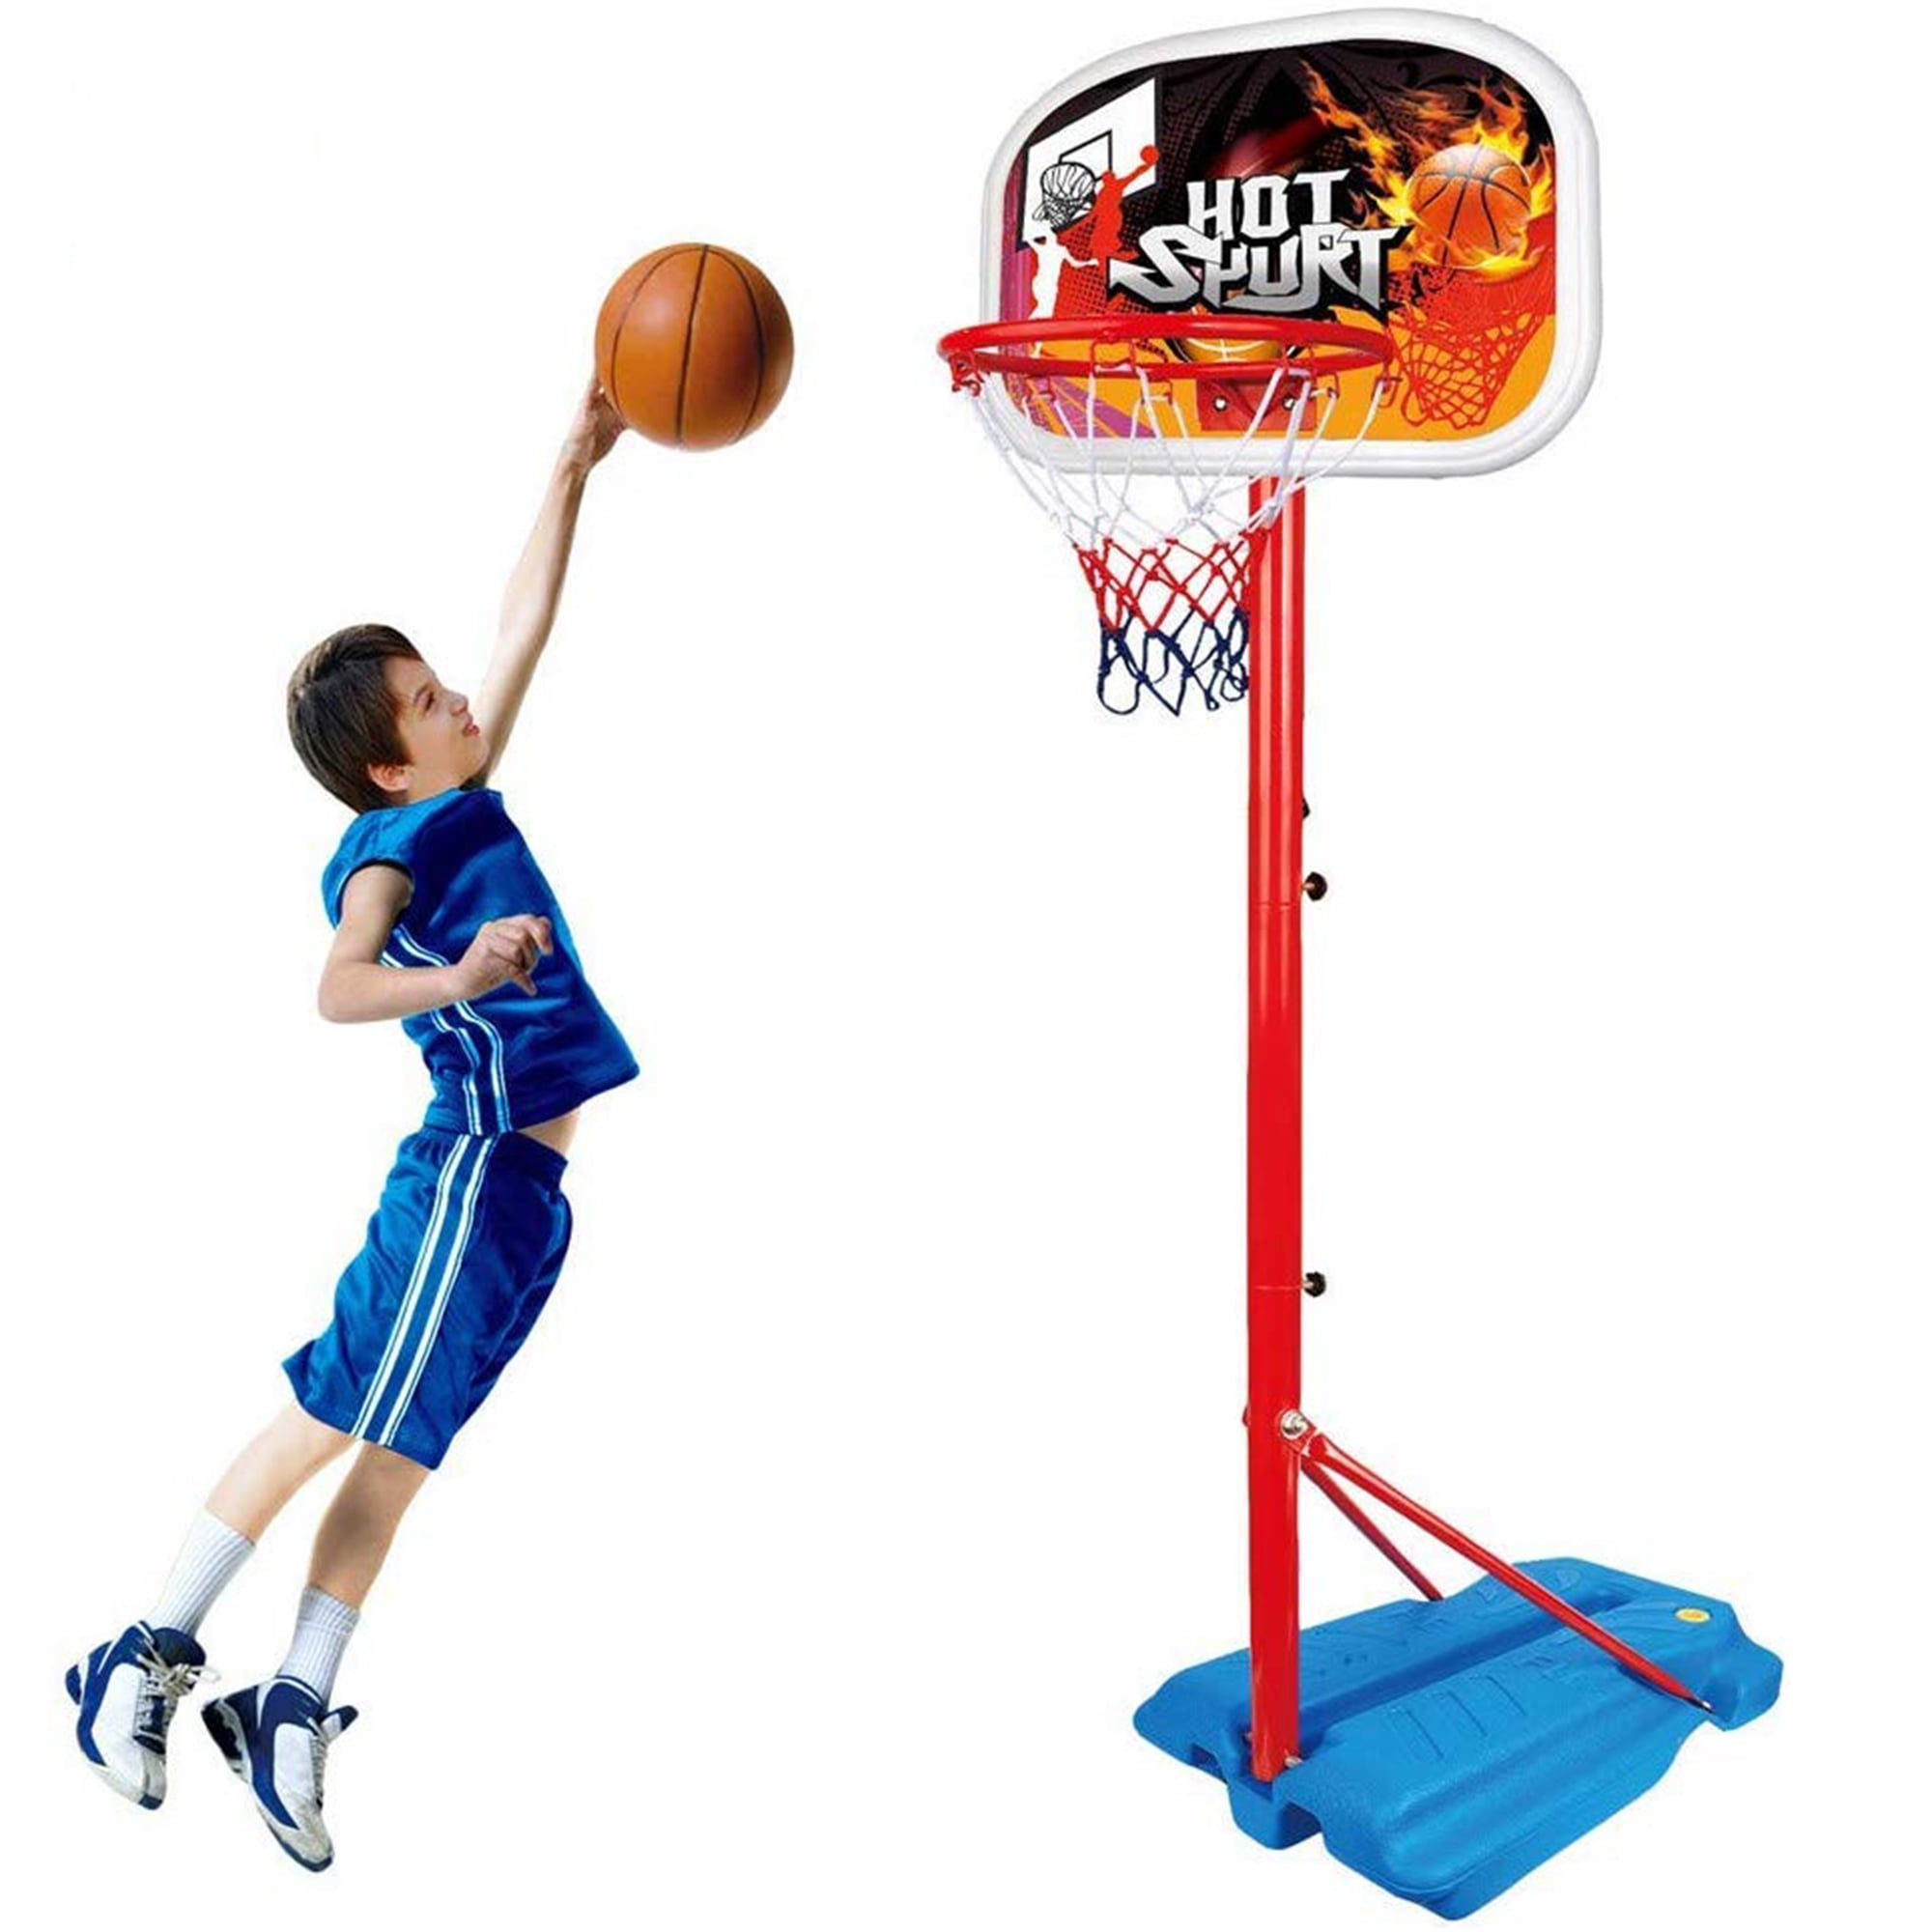 Kids Safety Toy Ball Indoor Hanging Basketball Hoop+Ball Set Workout Sports Toys 